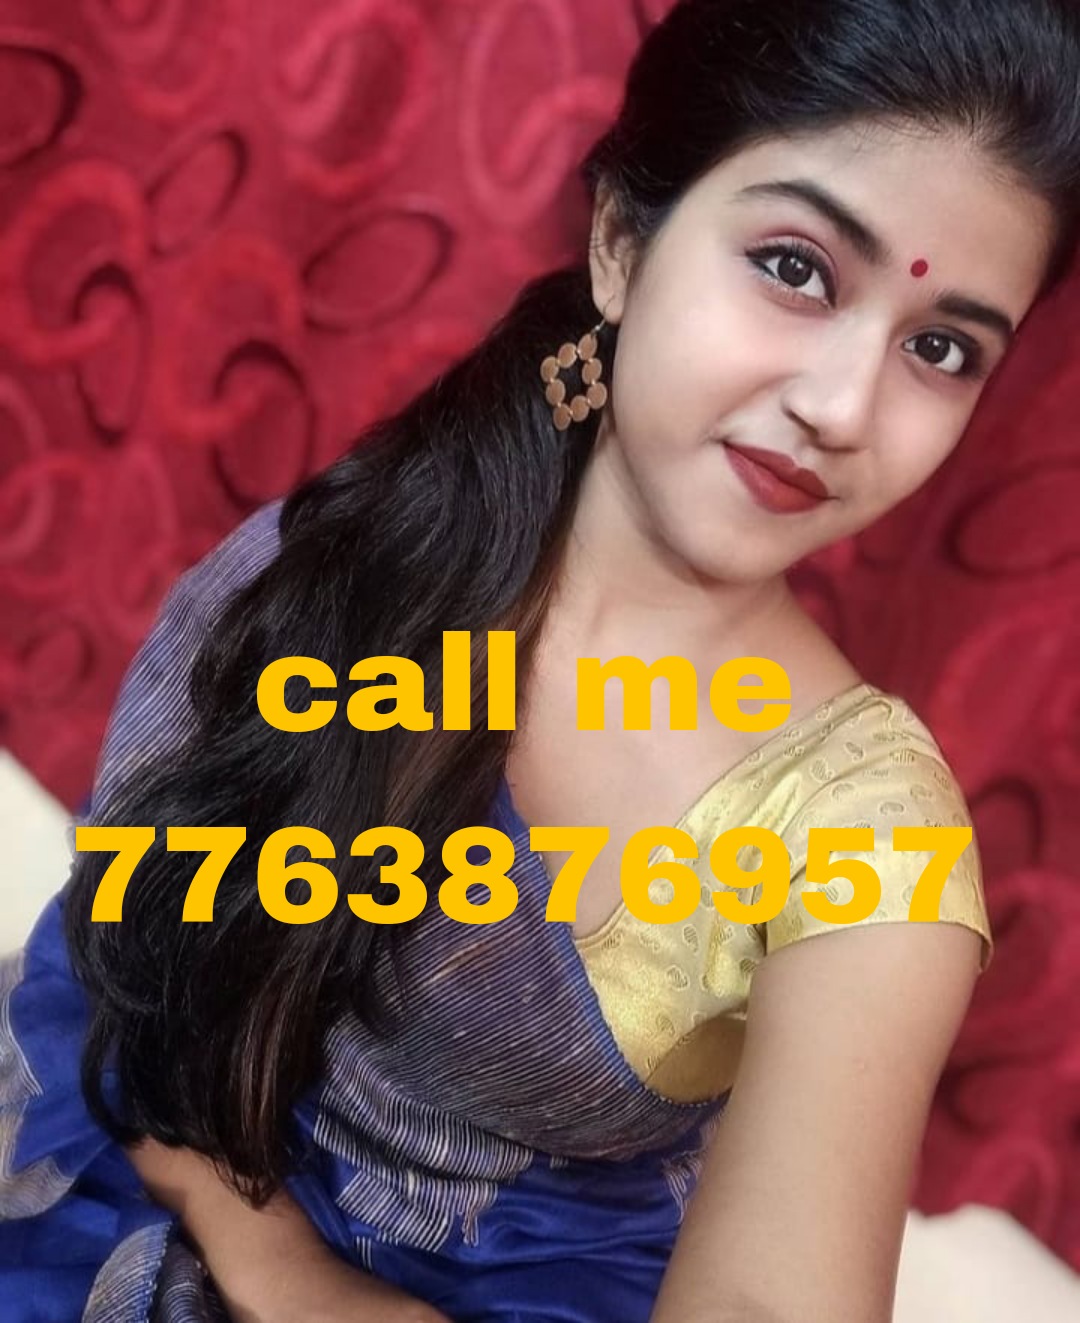 LOW PRICE CASH PAYMENT WHITEFIELD CALL GIRL 